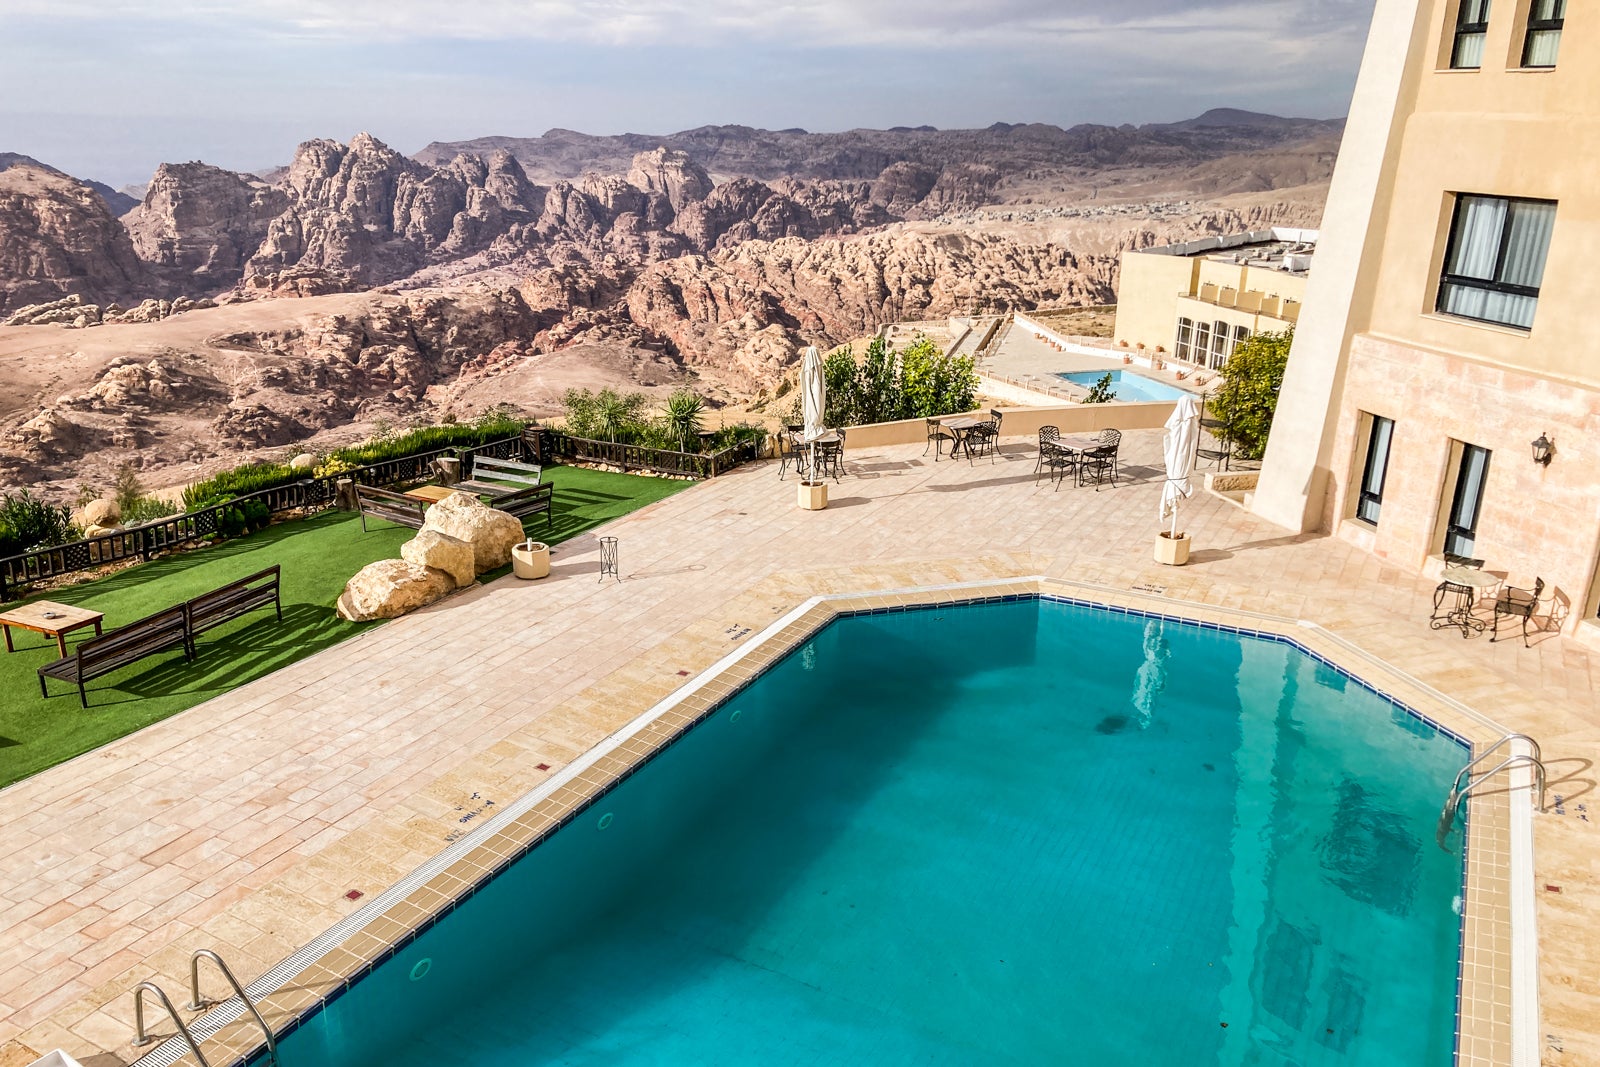 a swimming pool at a hotel in the desert, as seen from above